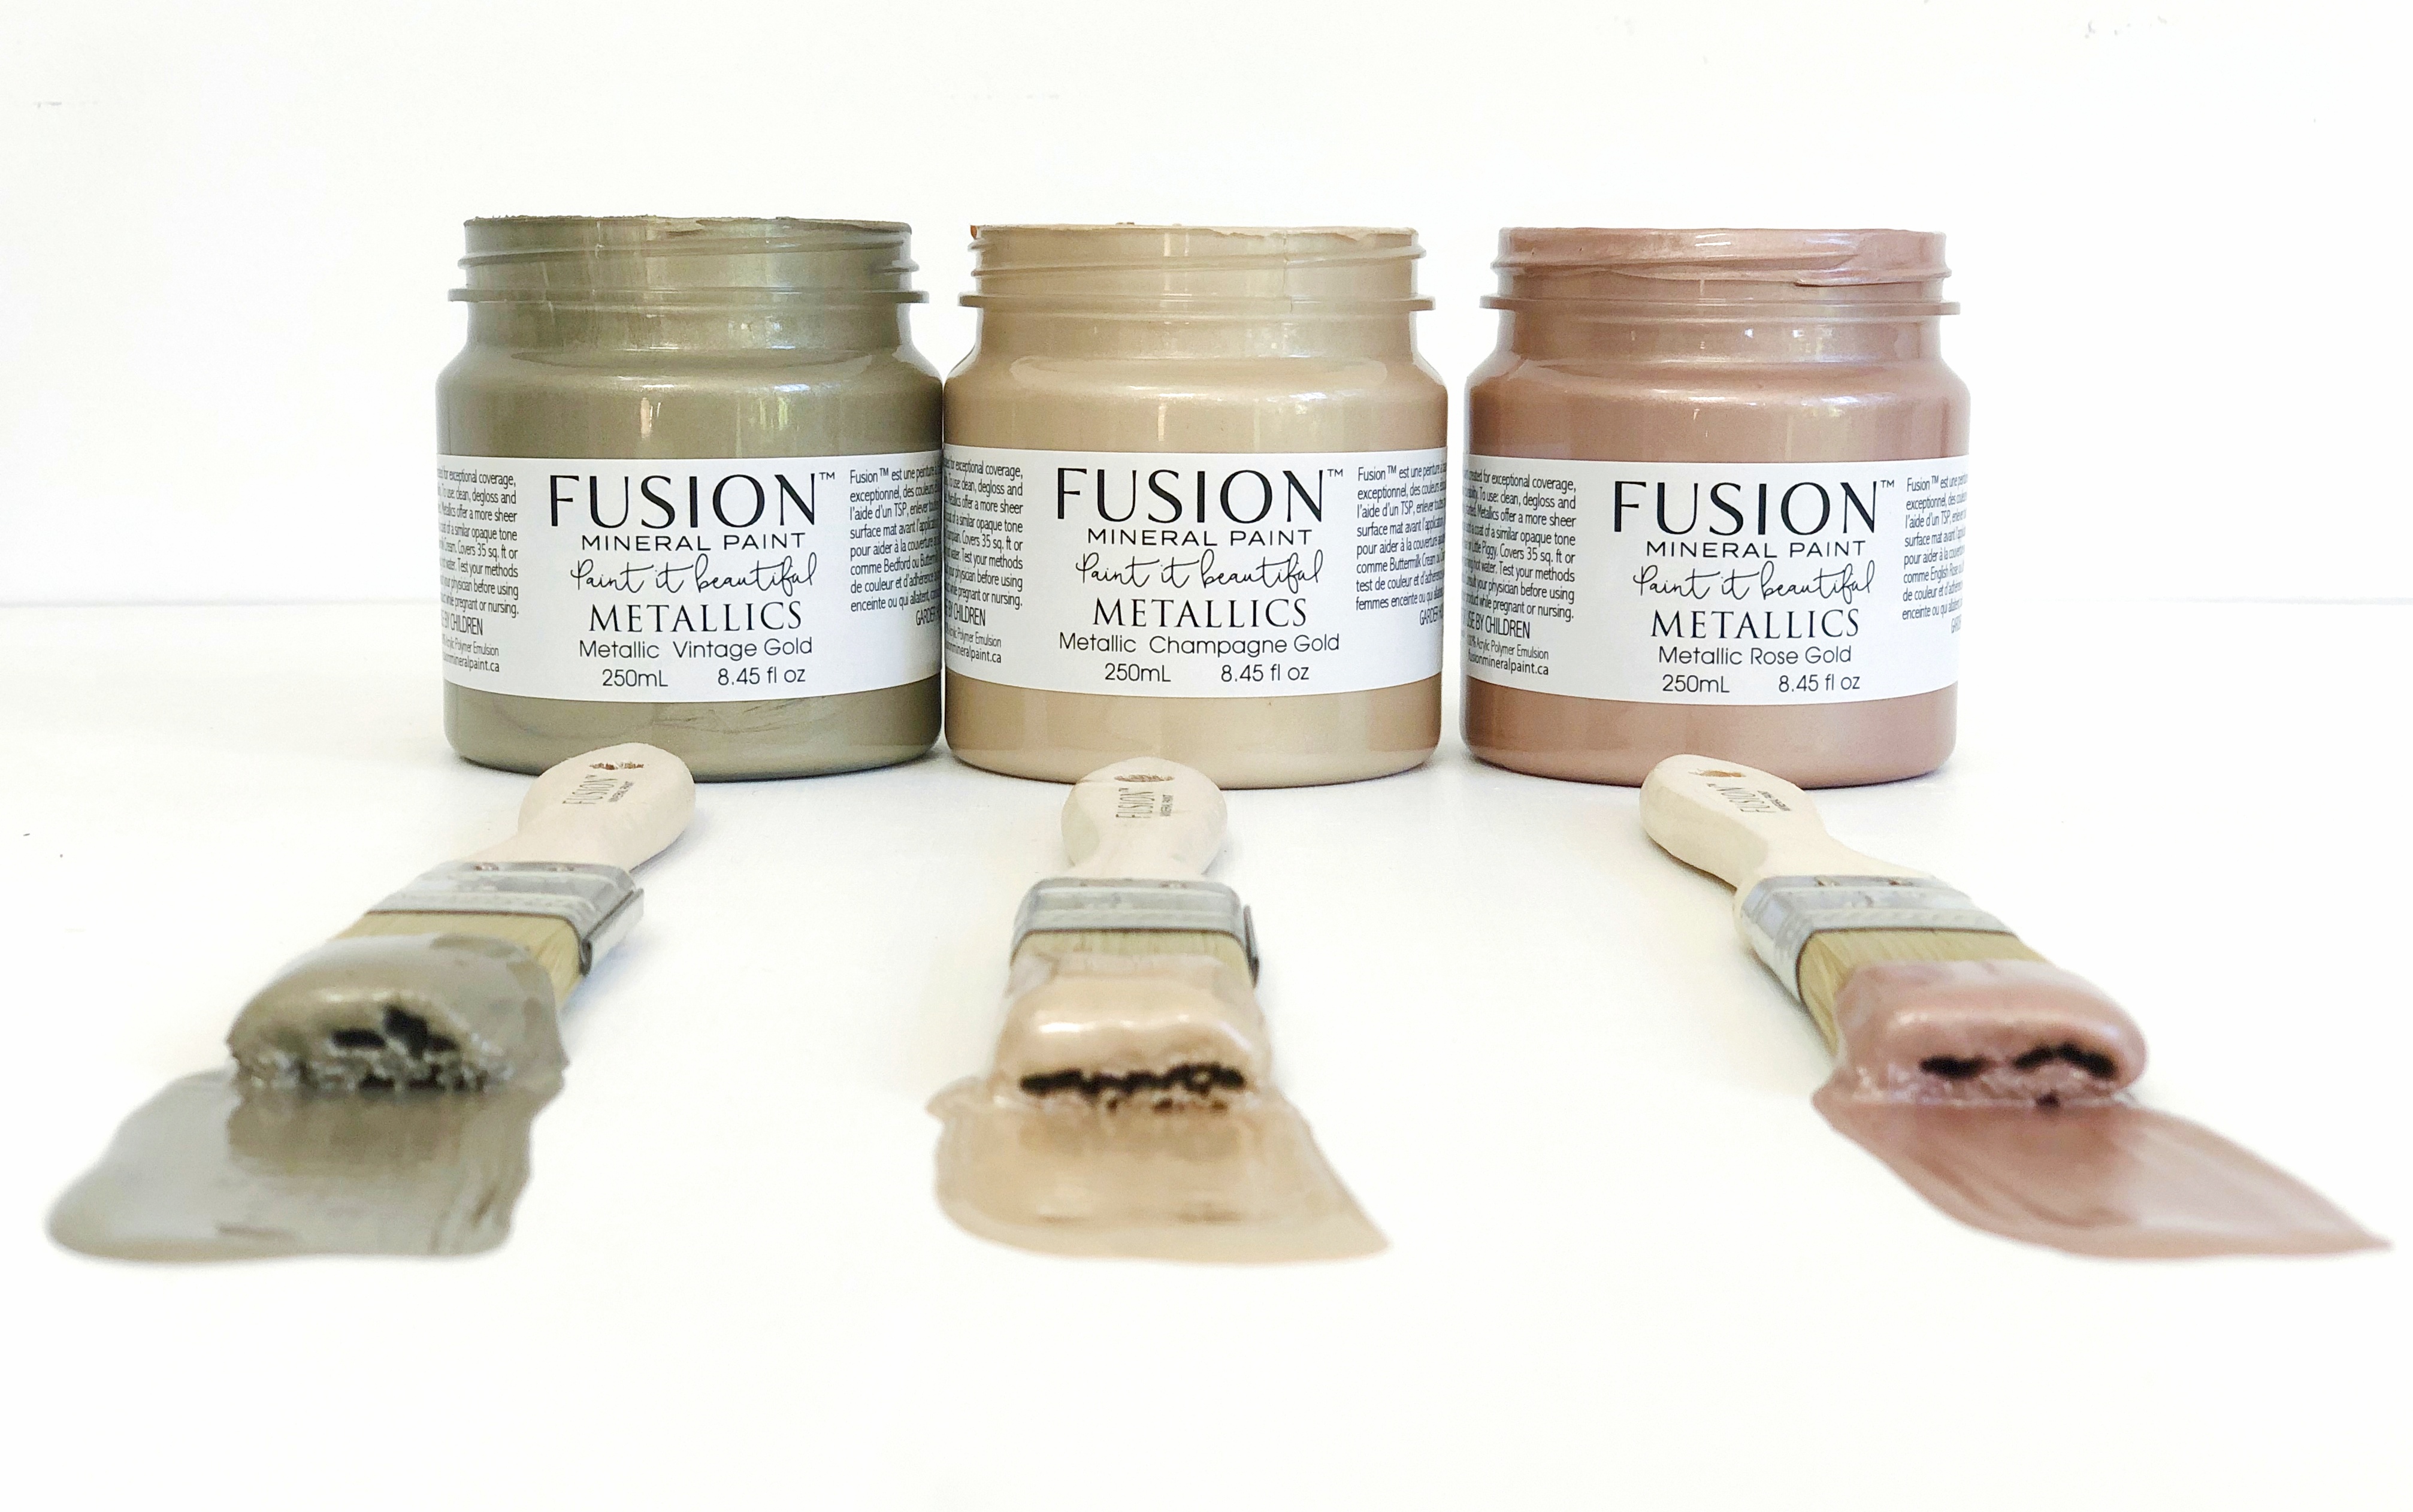 Fusion Mineral Paint S Limited Edition Metallics Fusion Mineral Paint